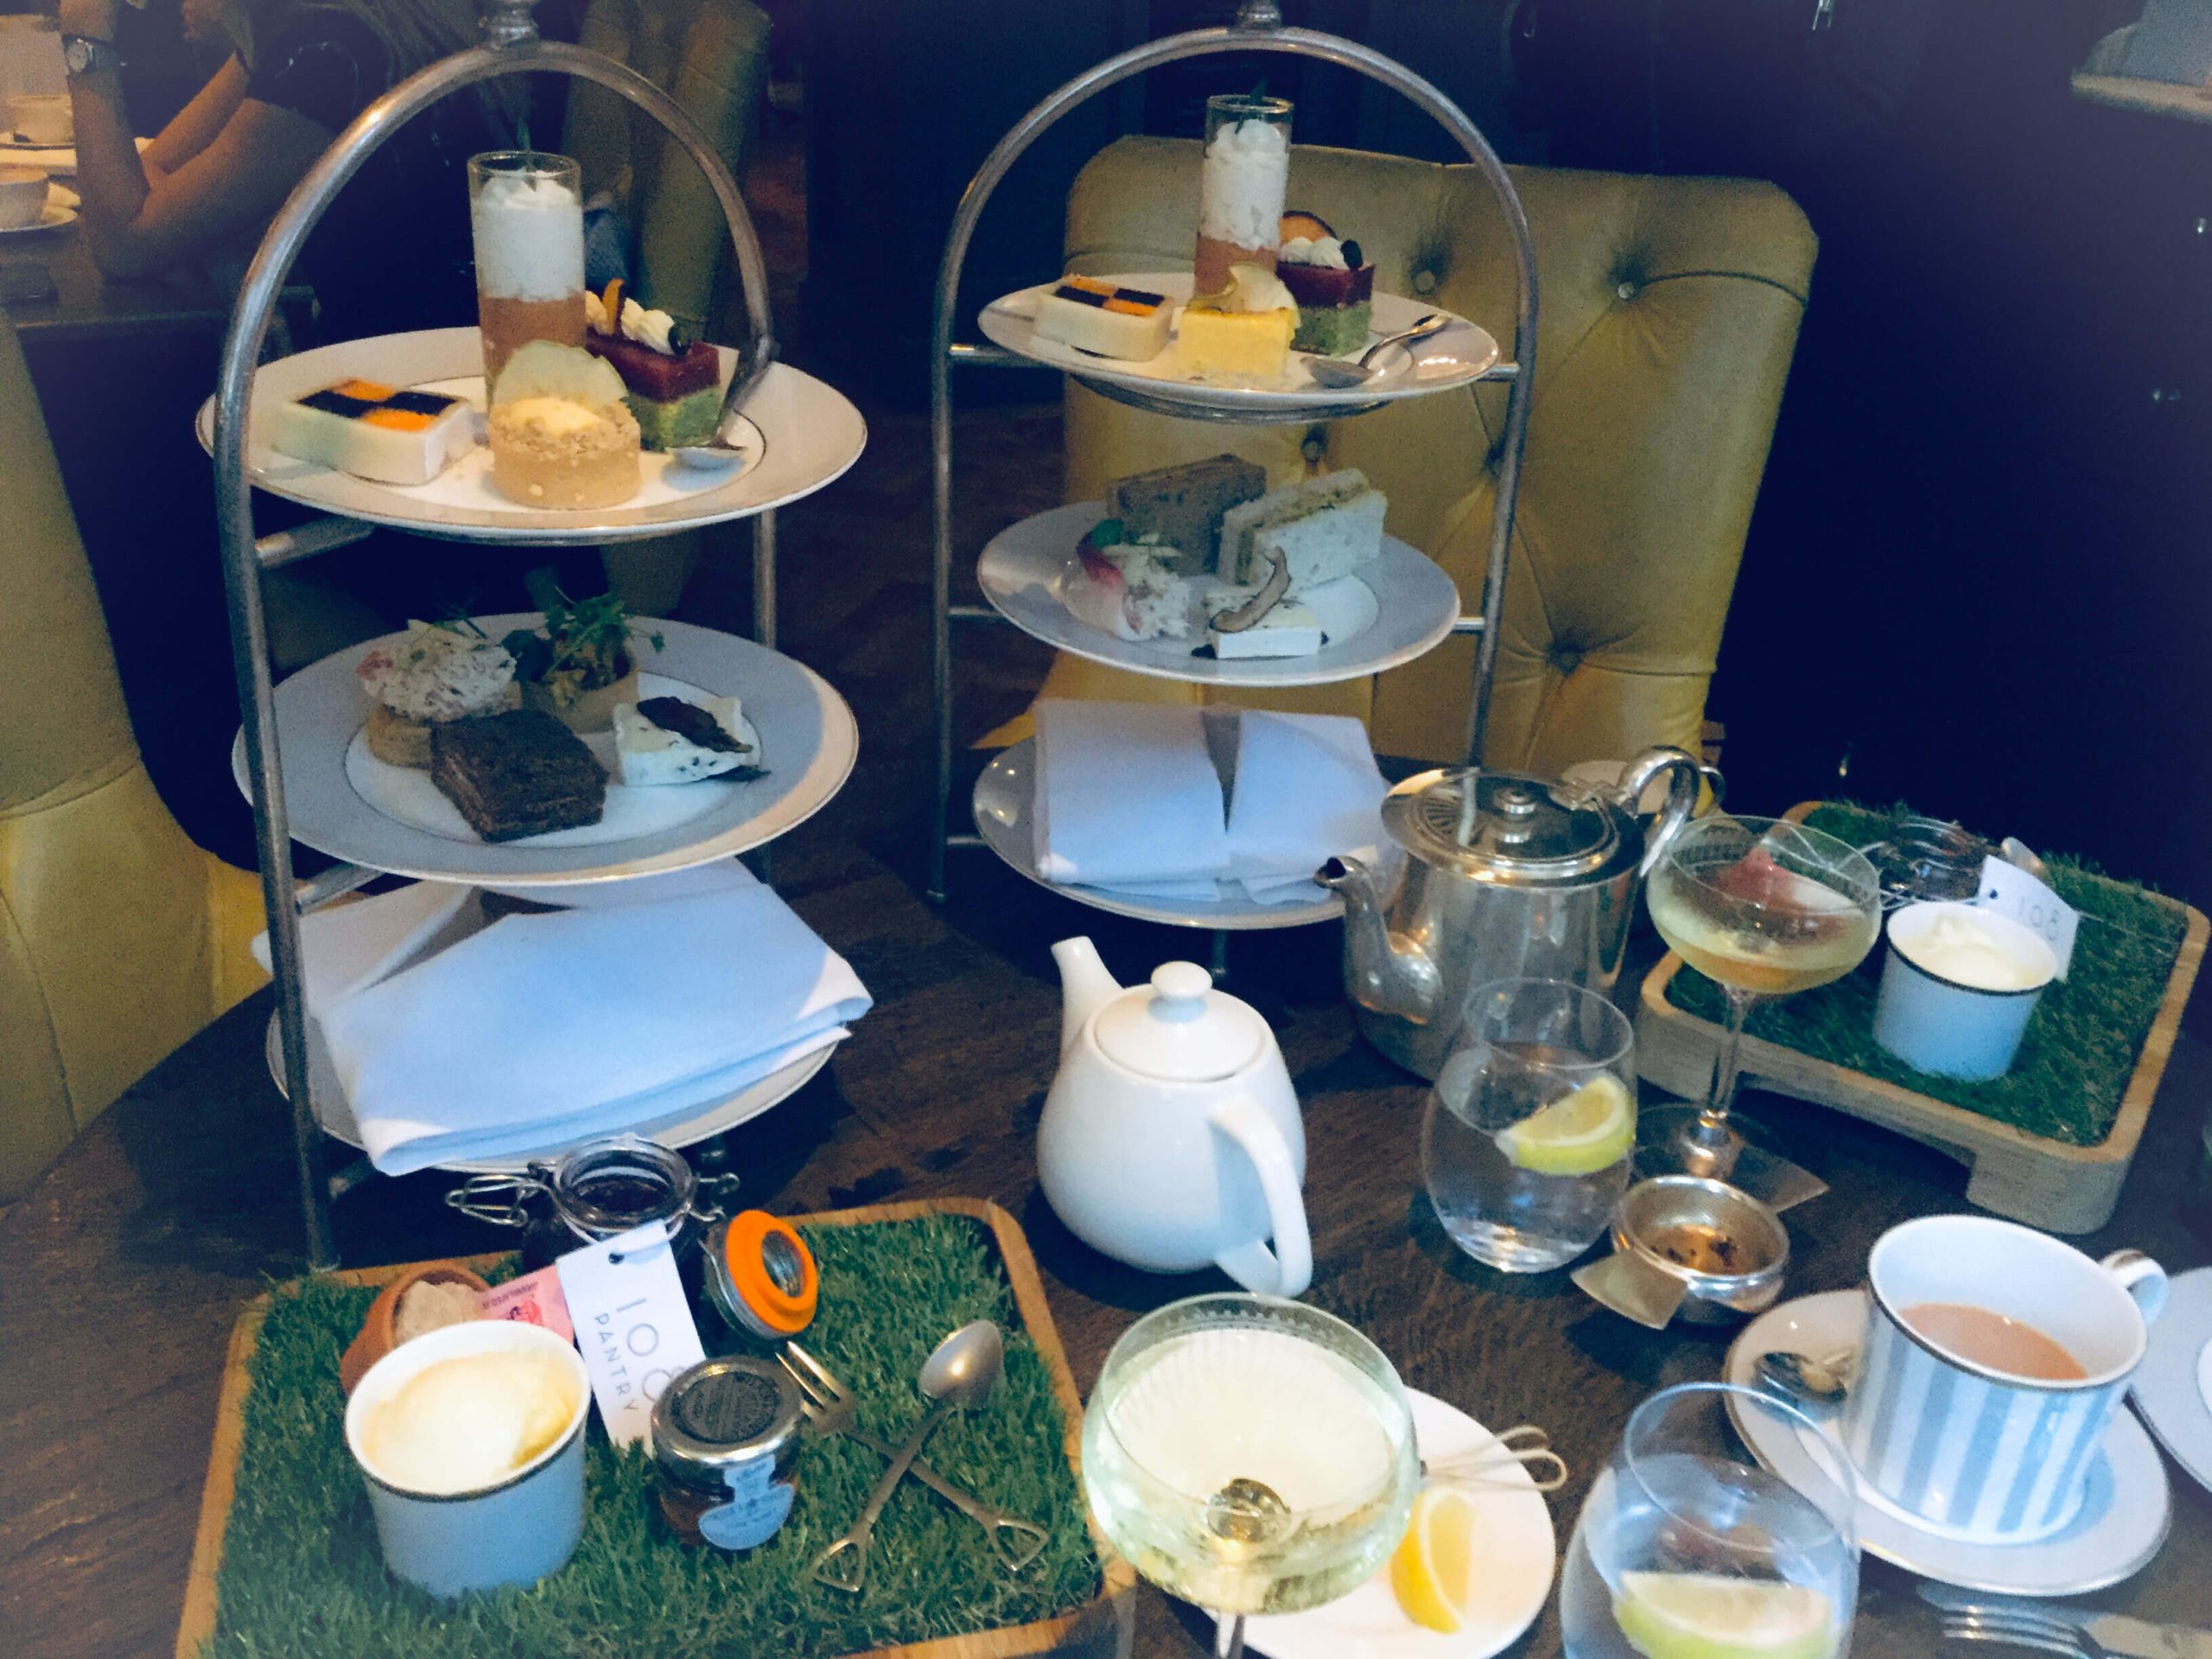 Pantry’s Quintessentially British Afternoon Tea Experience